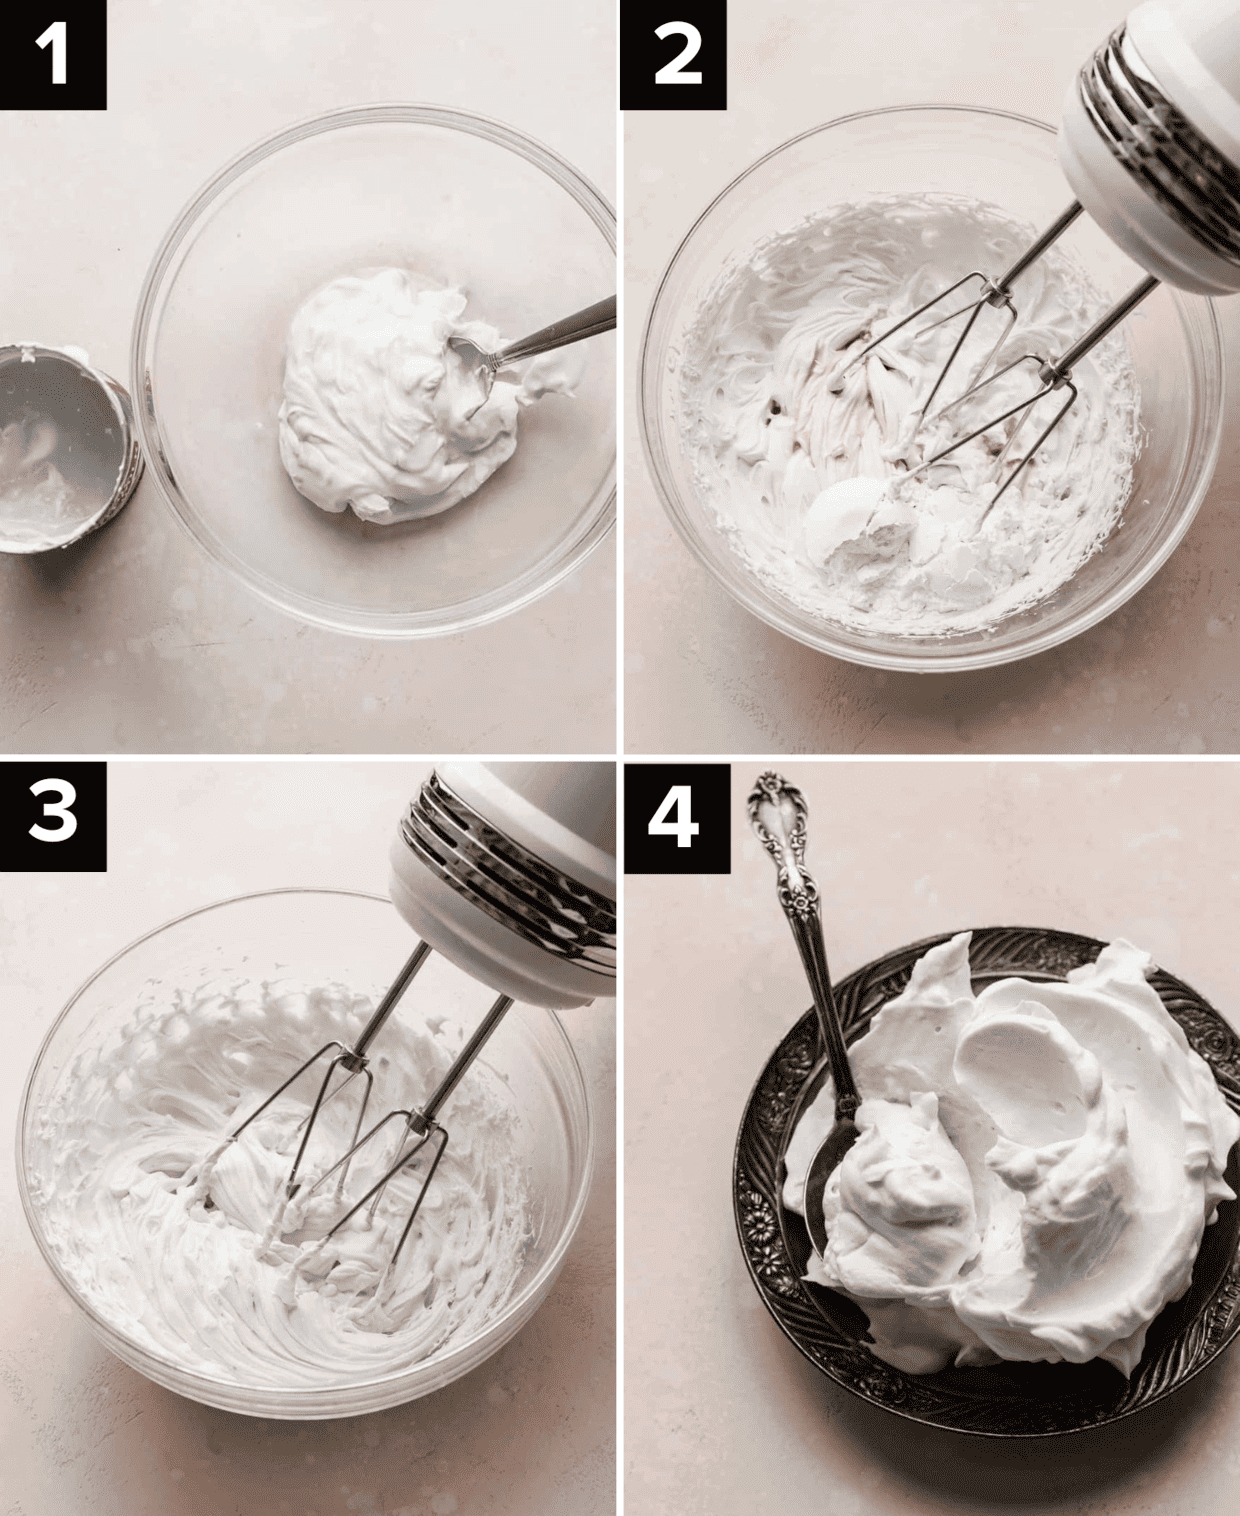 Four photos showing the process of how to make Coconut Whipped Cream, top left image is canned coconut milk in a glass bowl, top right is coconut milk mixed with powdered sugar and vanilla in a glass bowl, bottom left image is Coconut Whipped Cream in a glass bowl, bottom right image is Coconut Whipped Cream on a black plate.